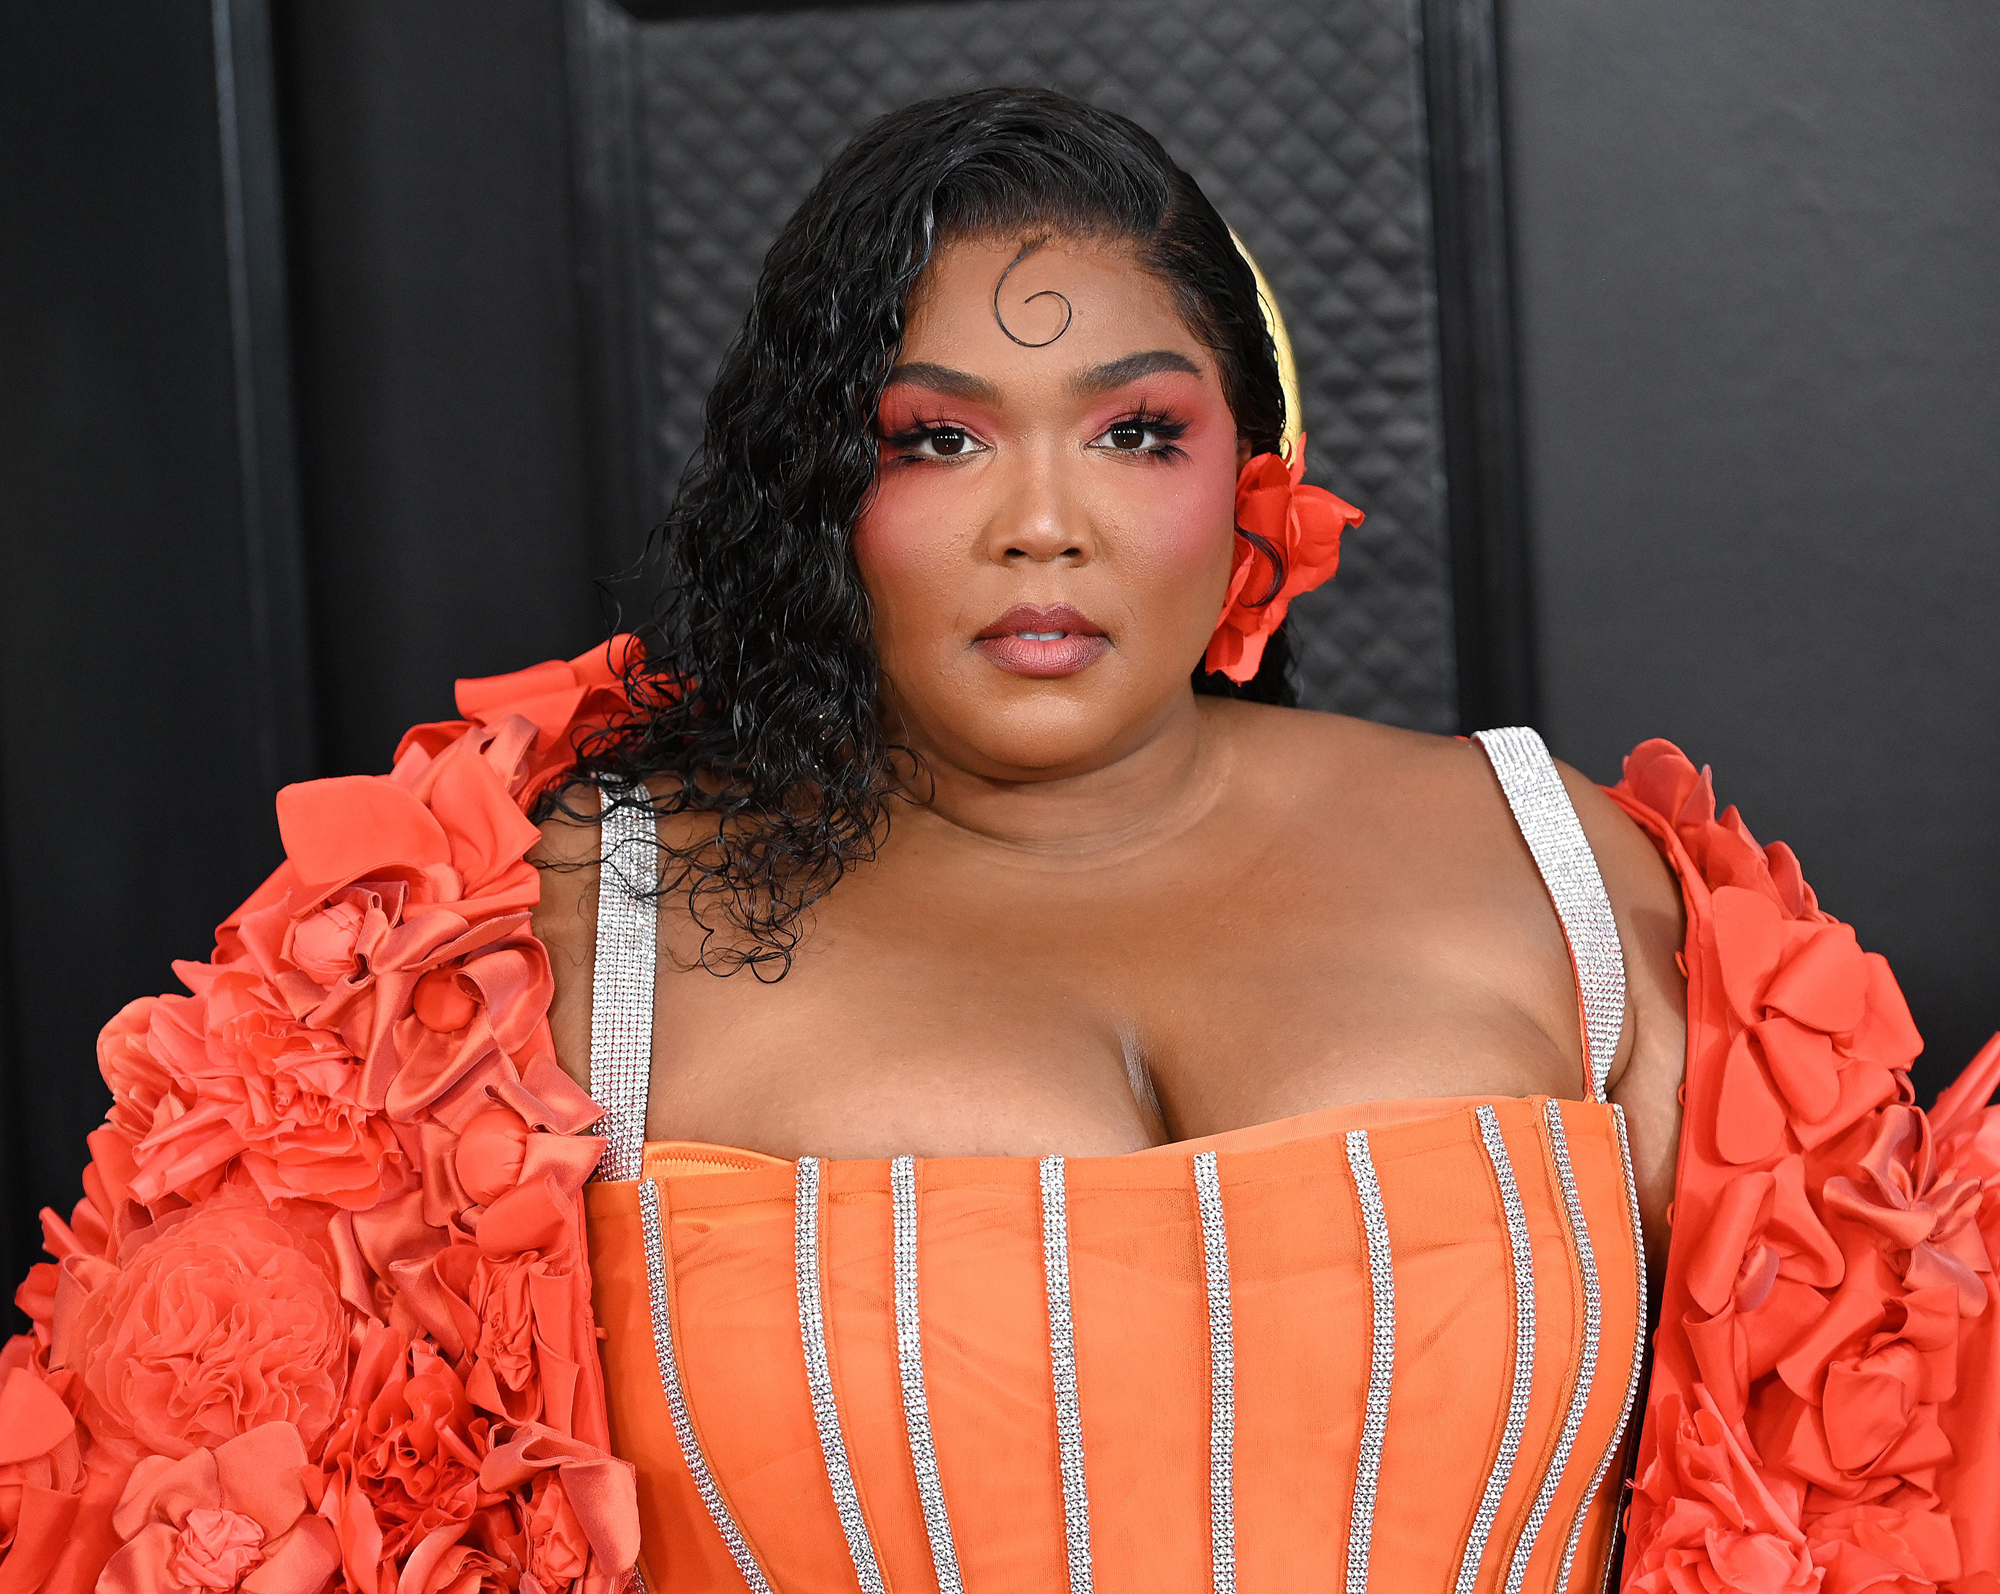 Lizzo looks peachy in corset, cape on Grammys 2023 red carpet